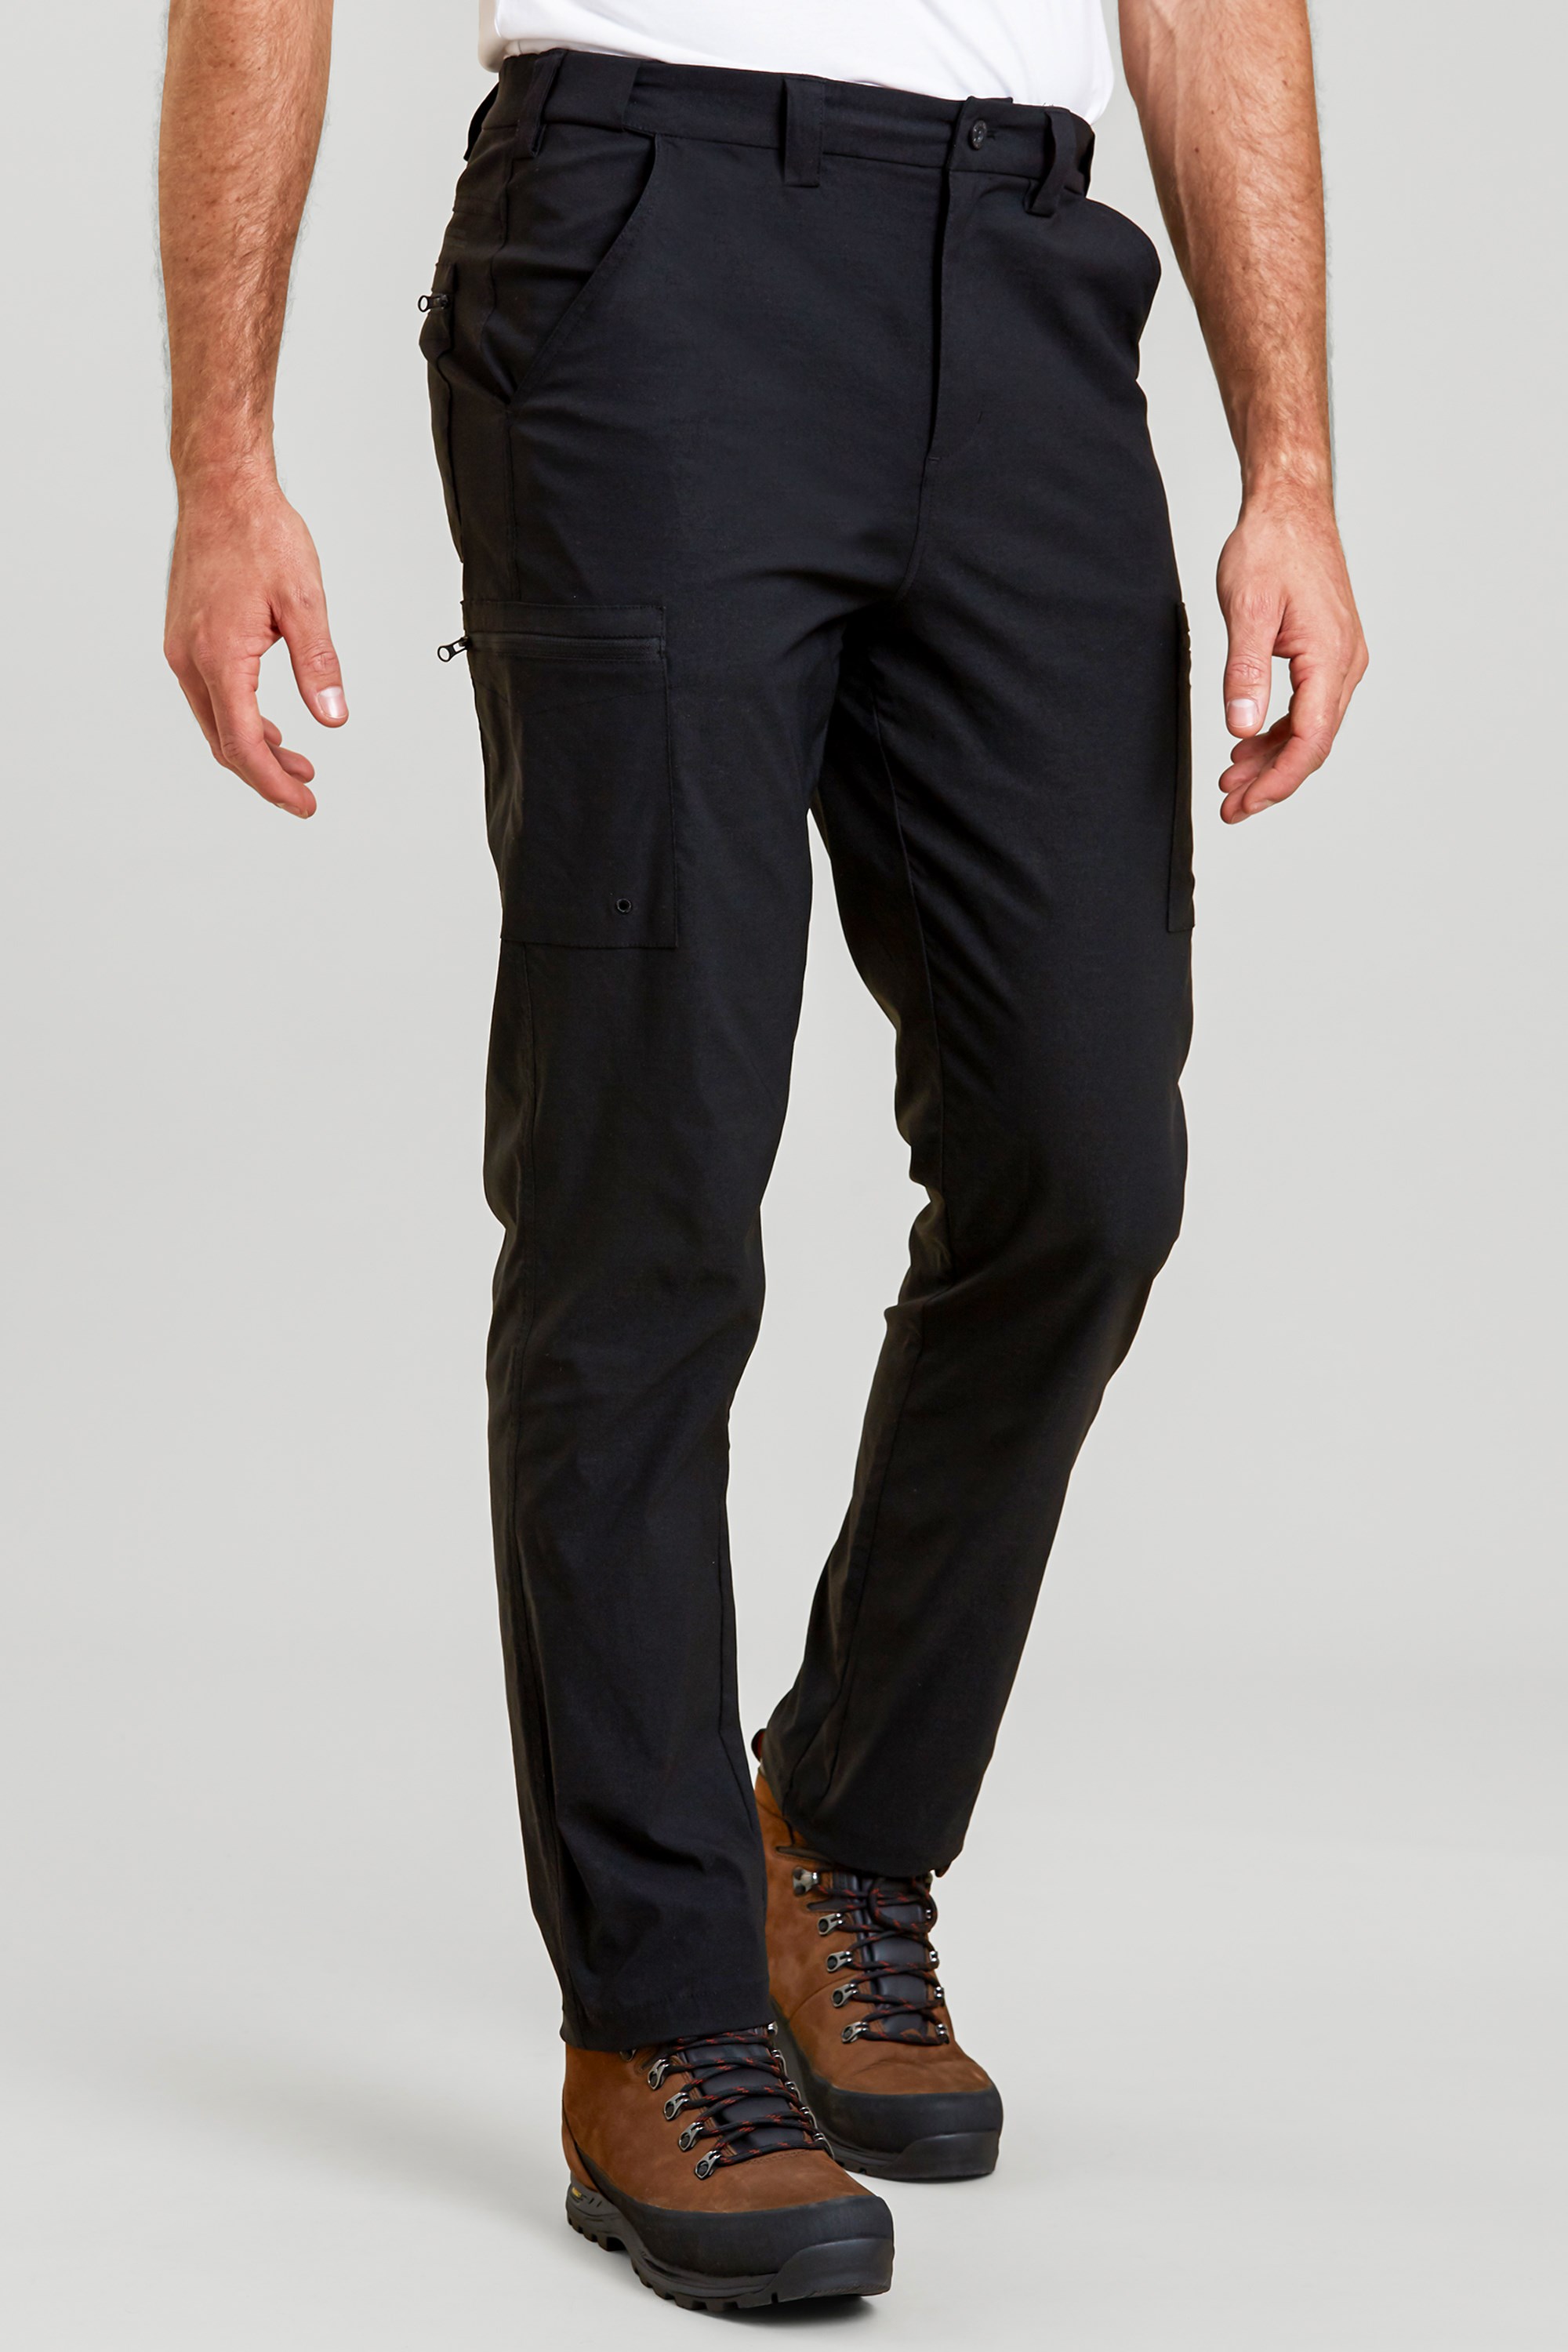 Share more than 85 mens stretch trousers best - in.cdgdbentre